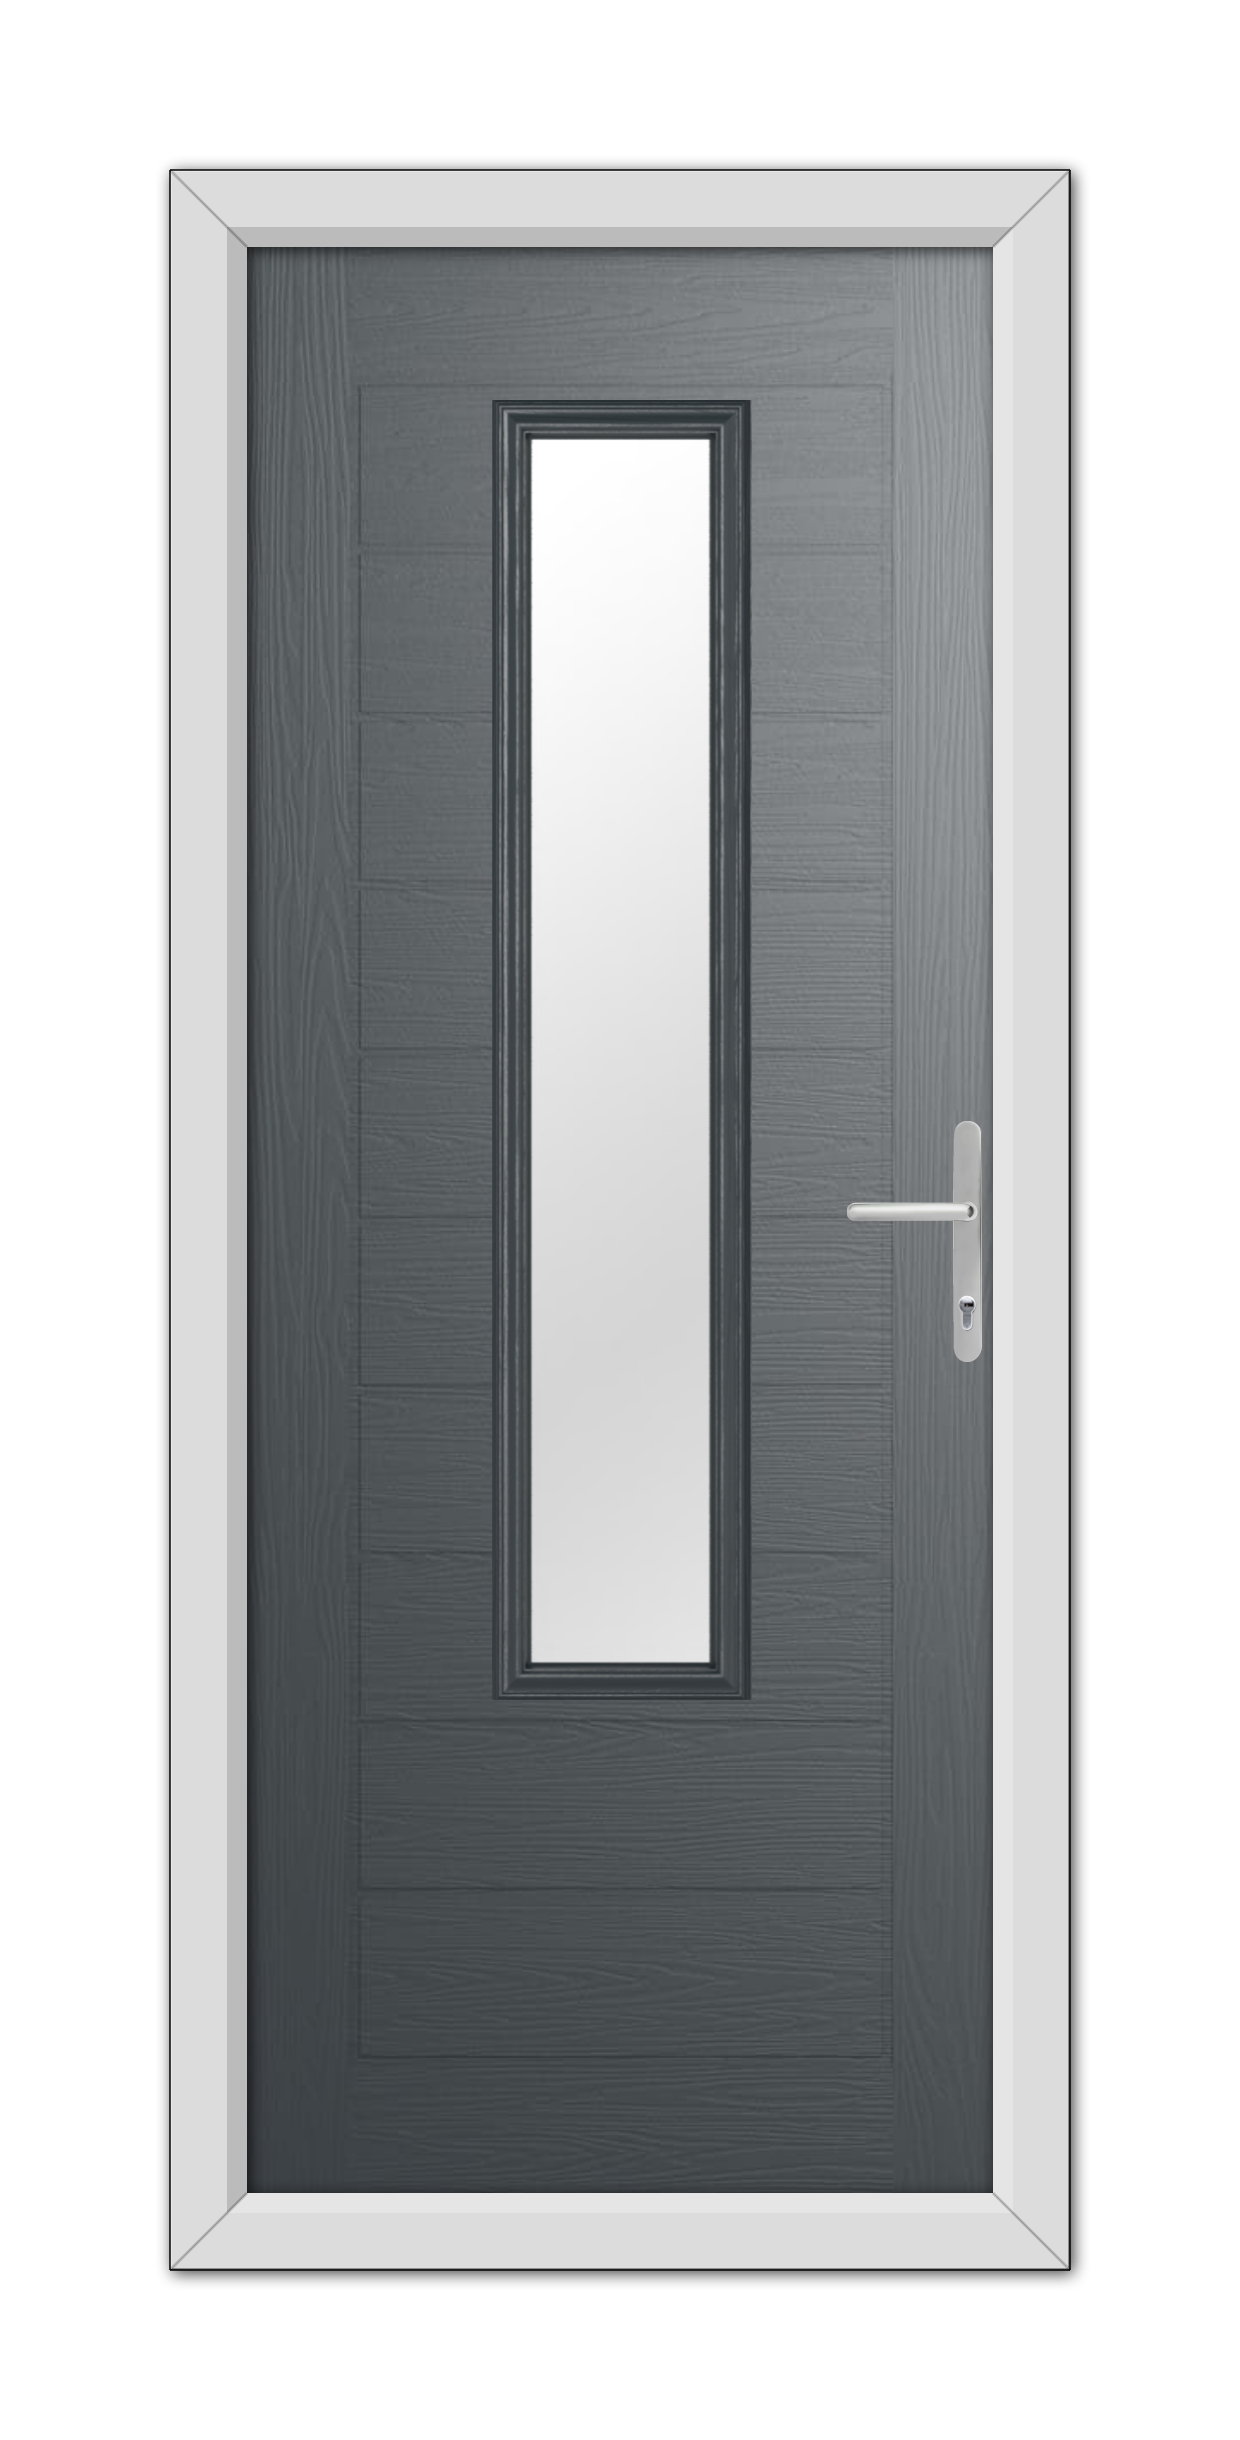 A modern Anthracite Grey Bedford Composite door with a vertical rectangular window and a silver handle, set within a white door frame.